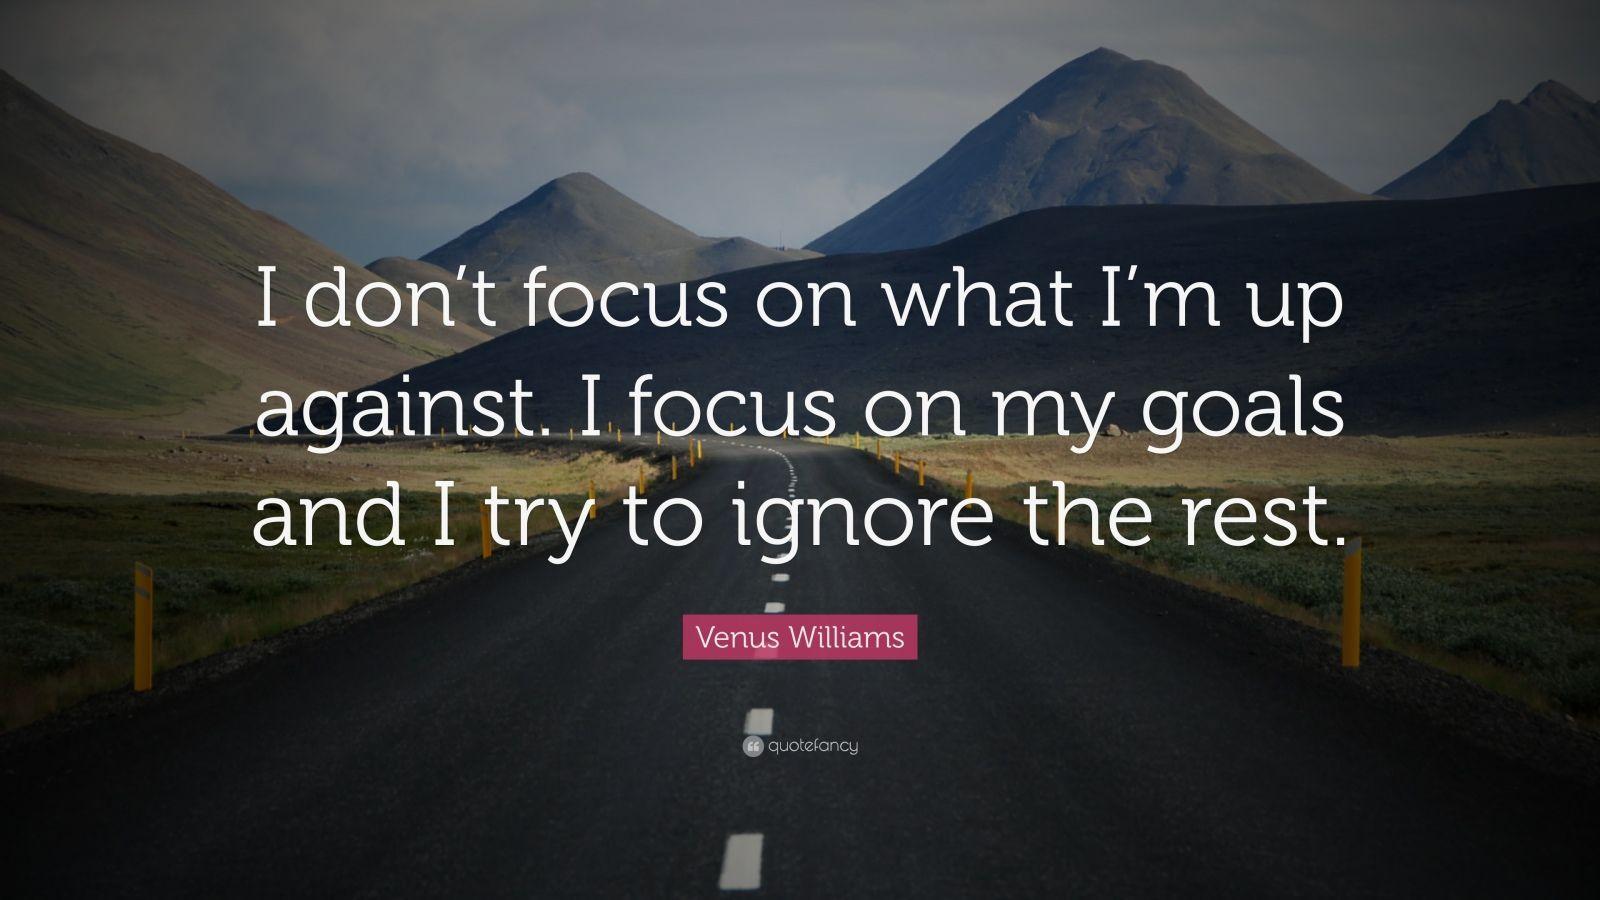 Startup Quotes: “I don't focus on what I'm up against. I focus on my